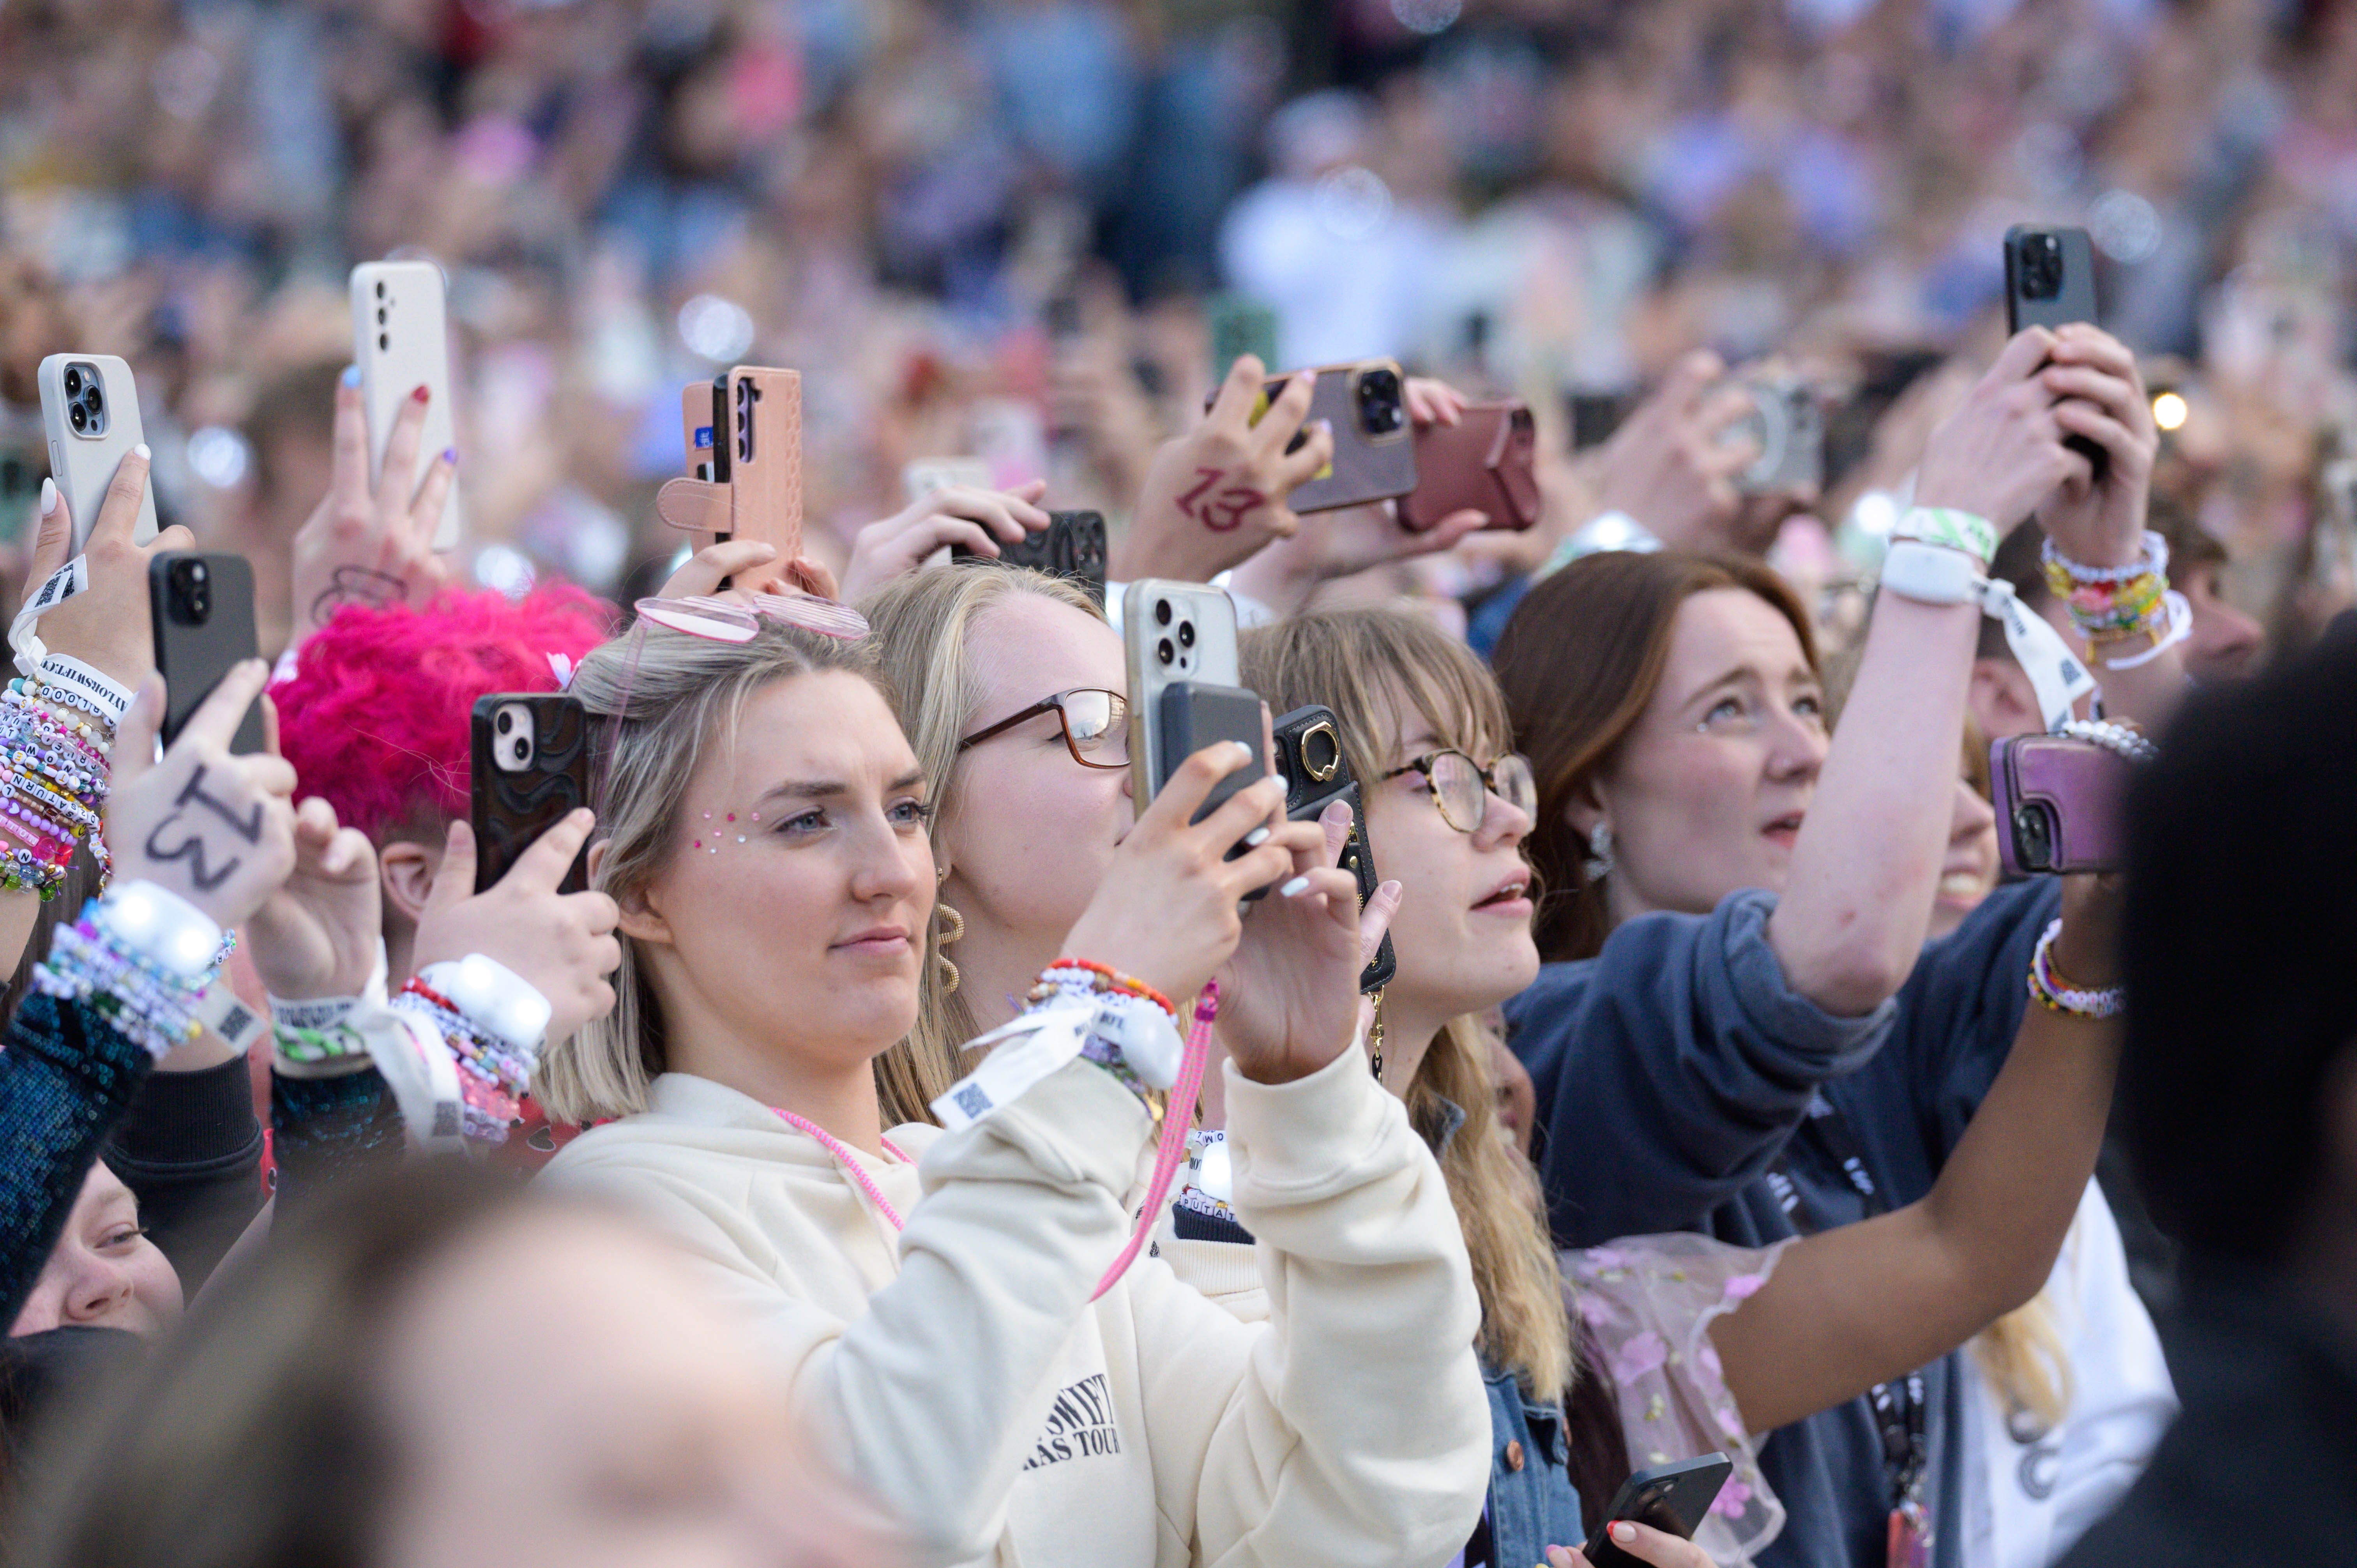 Almost 1.2 million fans spent an average of £848 on tickets, travel, accommodation,  and outfits